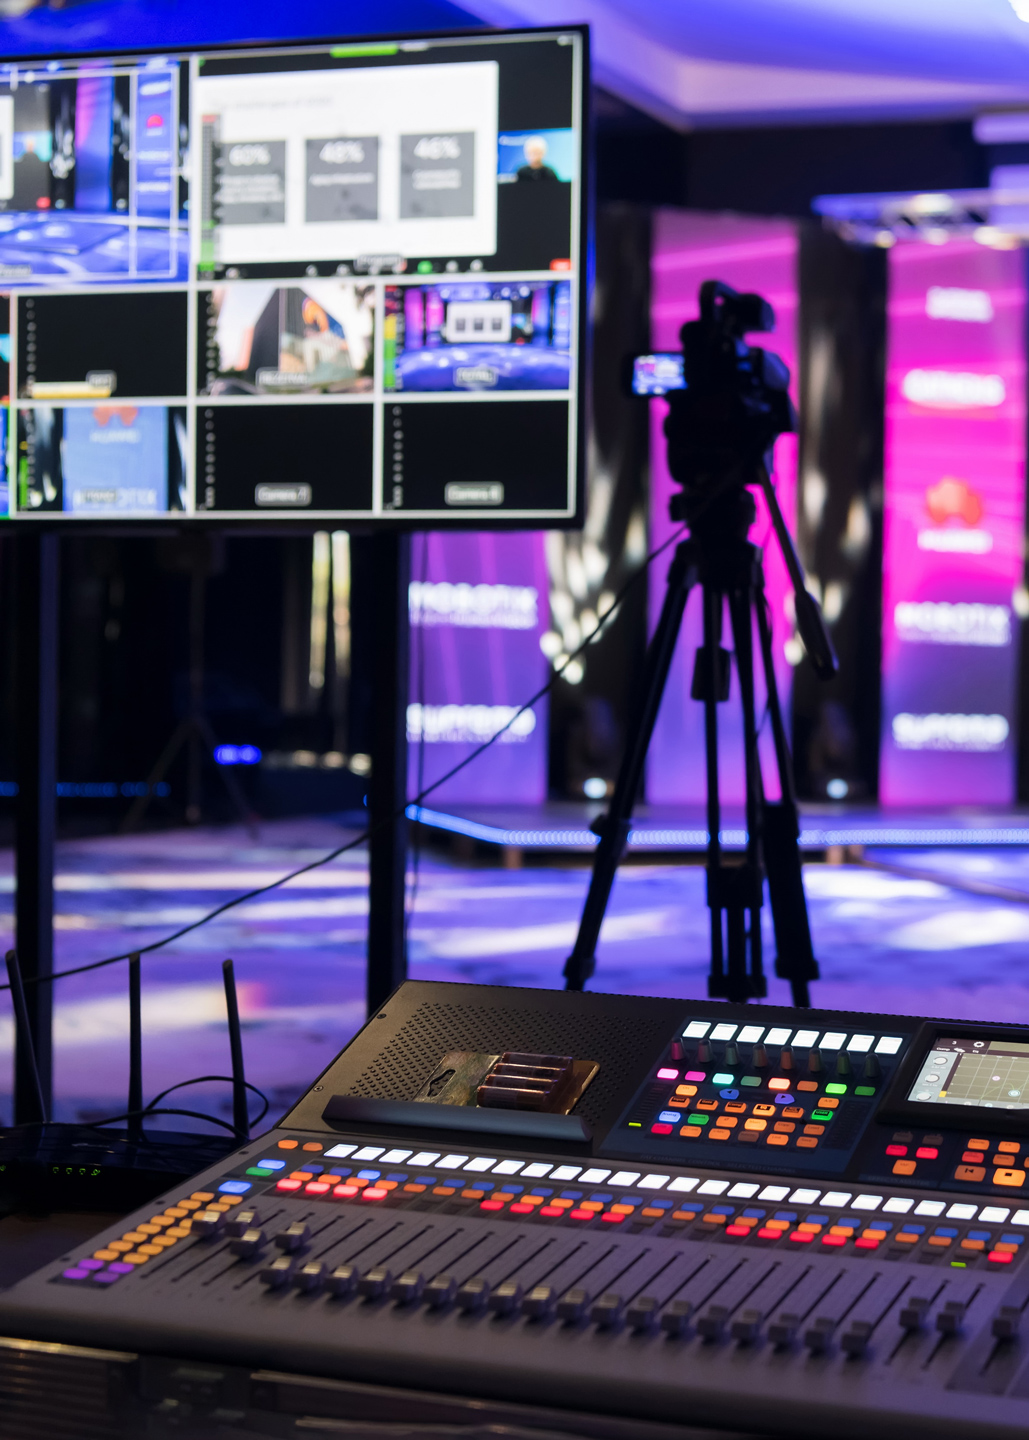 Foreground focus on a video production switcher with colorful buttons and a blurred background showing a camera on a tripod and monitors displaying various camera angles.